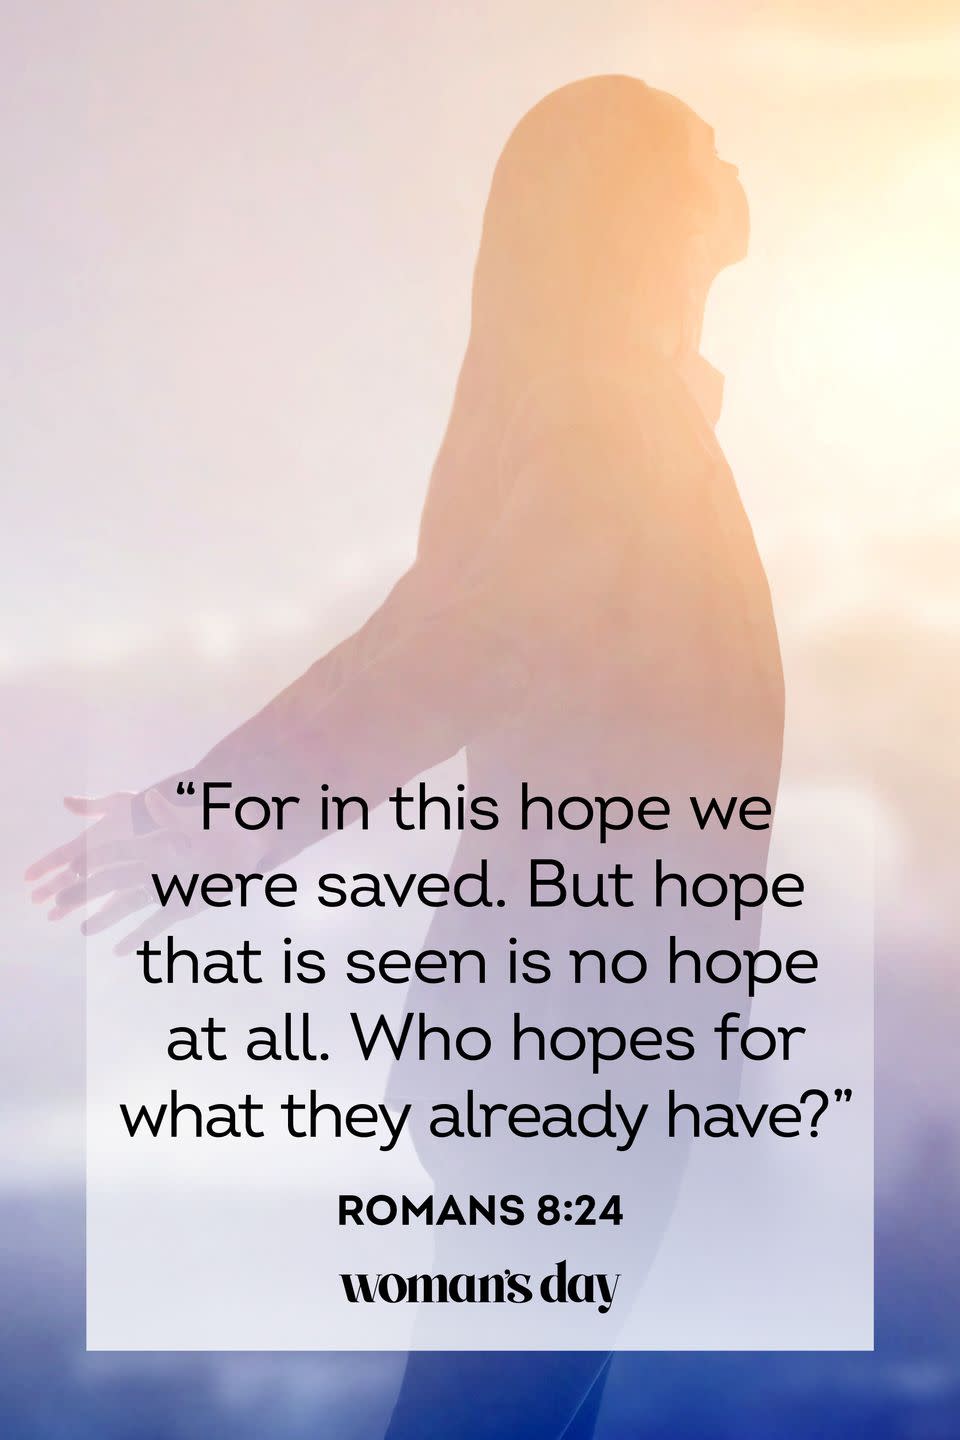 <p>“For in this hope we were saved. But hope that is seen is no hope at all. Who hopes for what they already have?”</p><p><strong>The Good News: </strong>God is the ultimate source of hope.</p>